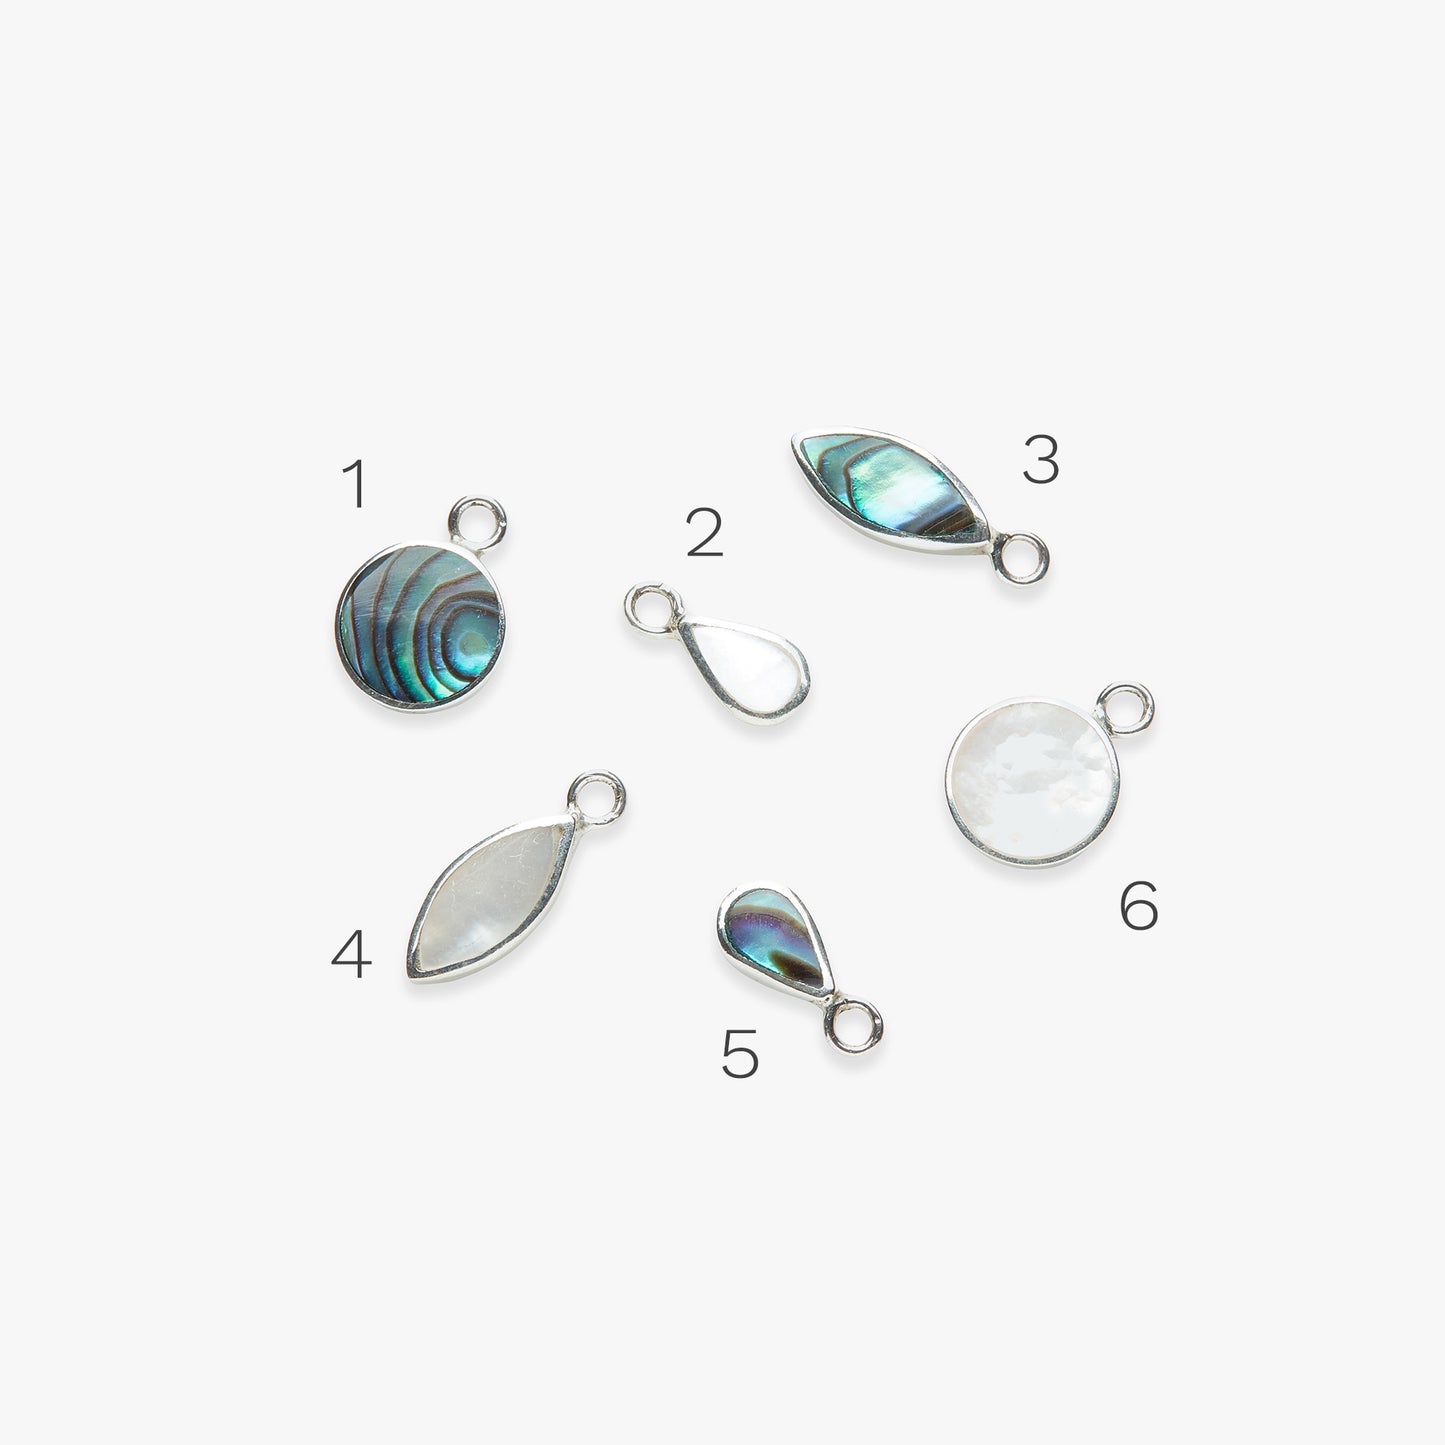 Add-on Abalone & Mother of Pearl pendant silver